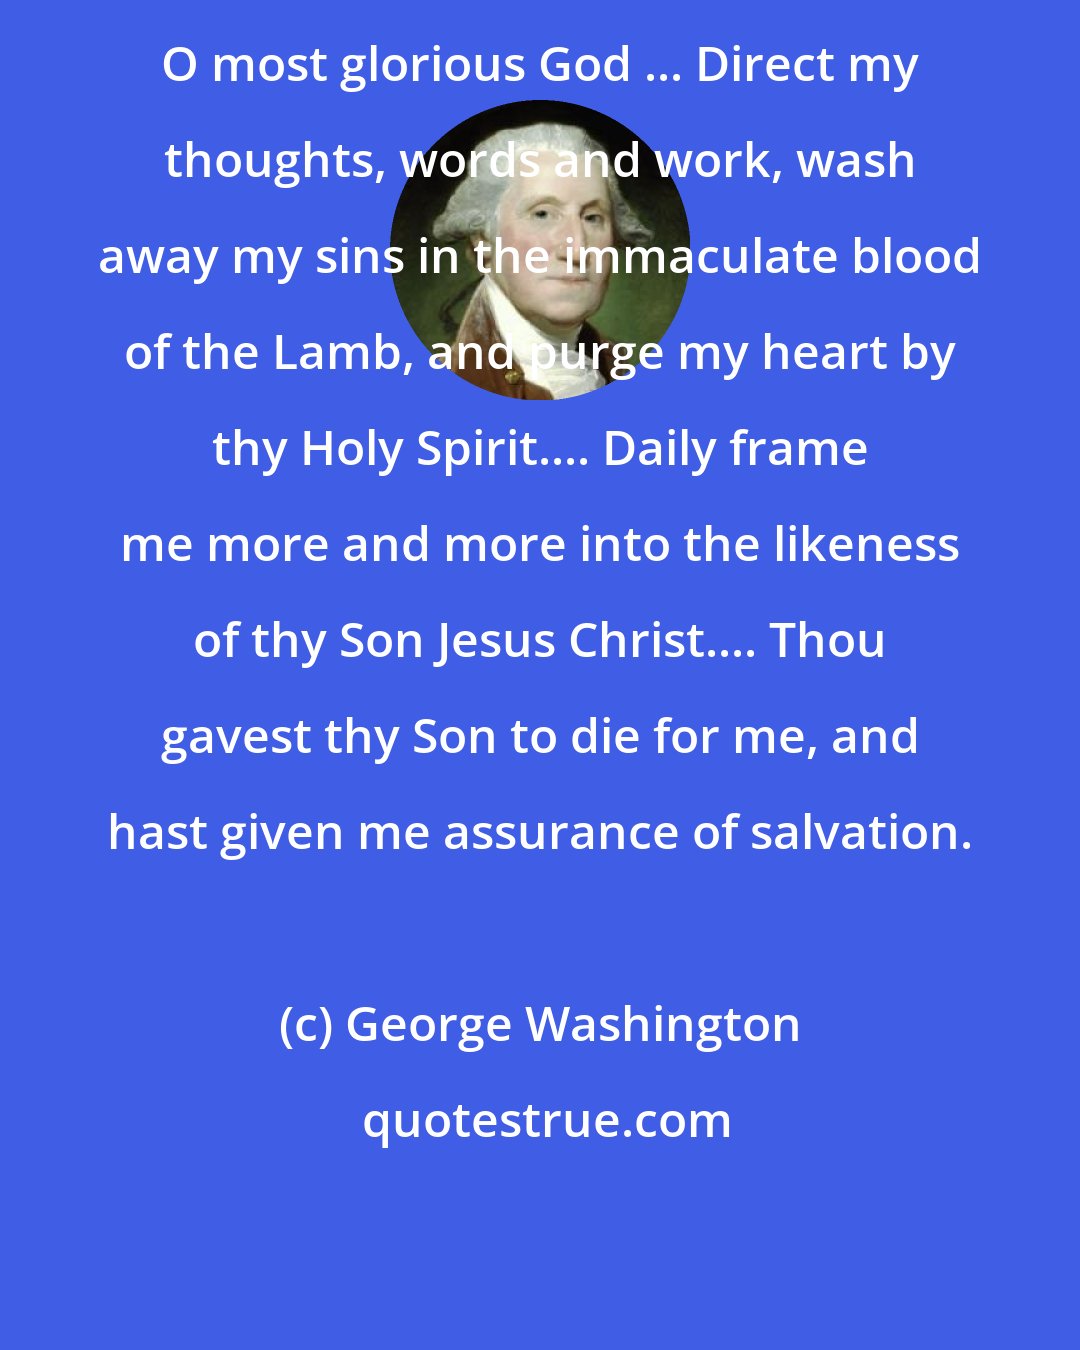 George Washington: O most glorious God ... Direct my thoughts, words and work, wash away my sins in the immaculate blood of the Lamb, and purge my heart by thy Holy Spirit.... Daily frame me more and more into the likeness of thy Son Jesus Christ.... Thou gavest thy Son to die for me, and hast given me assurance of salvation.